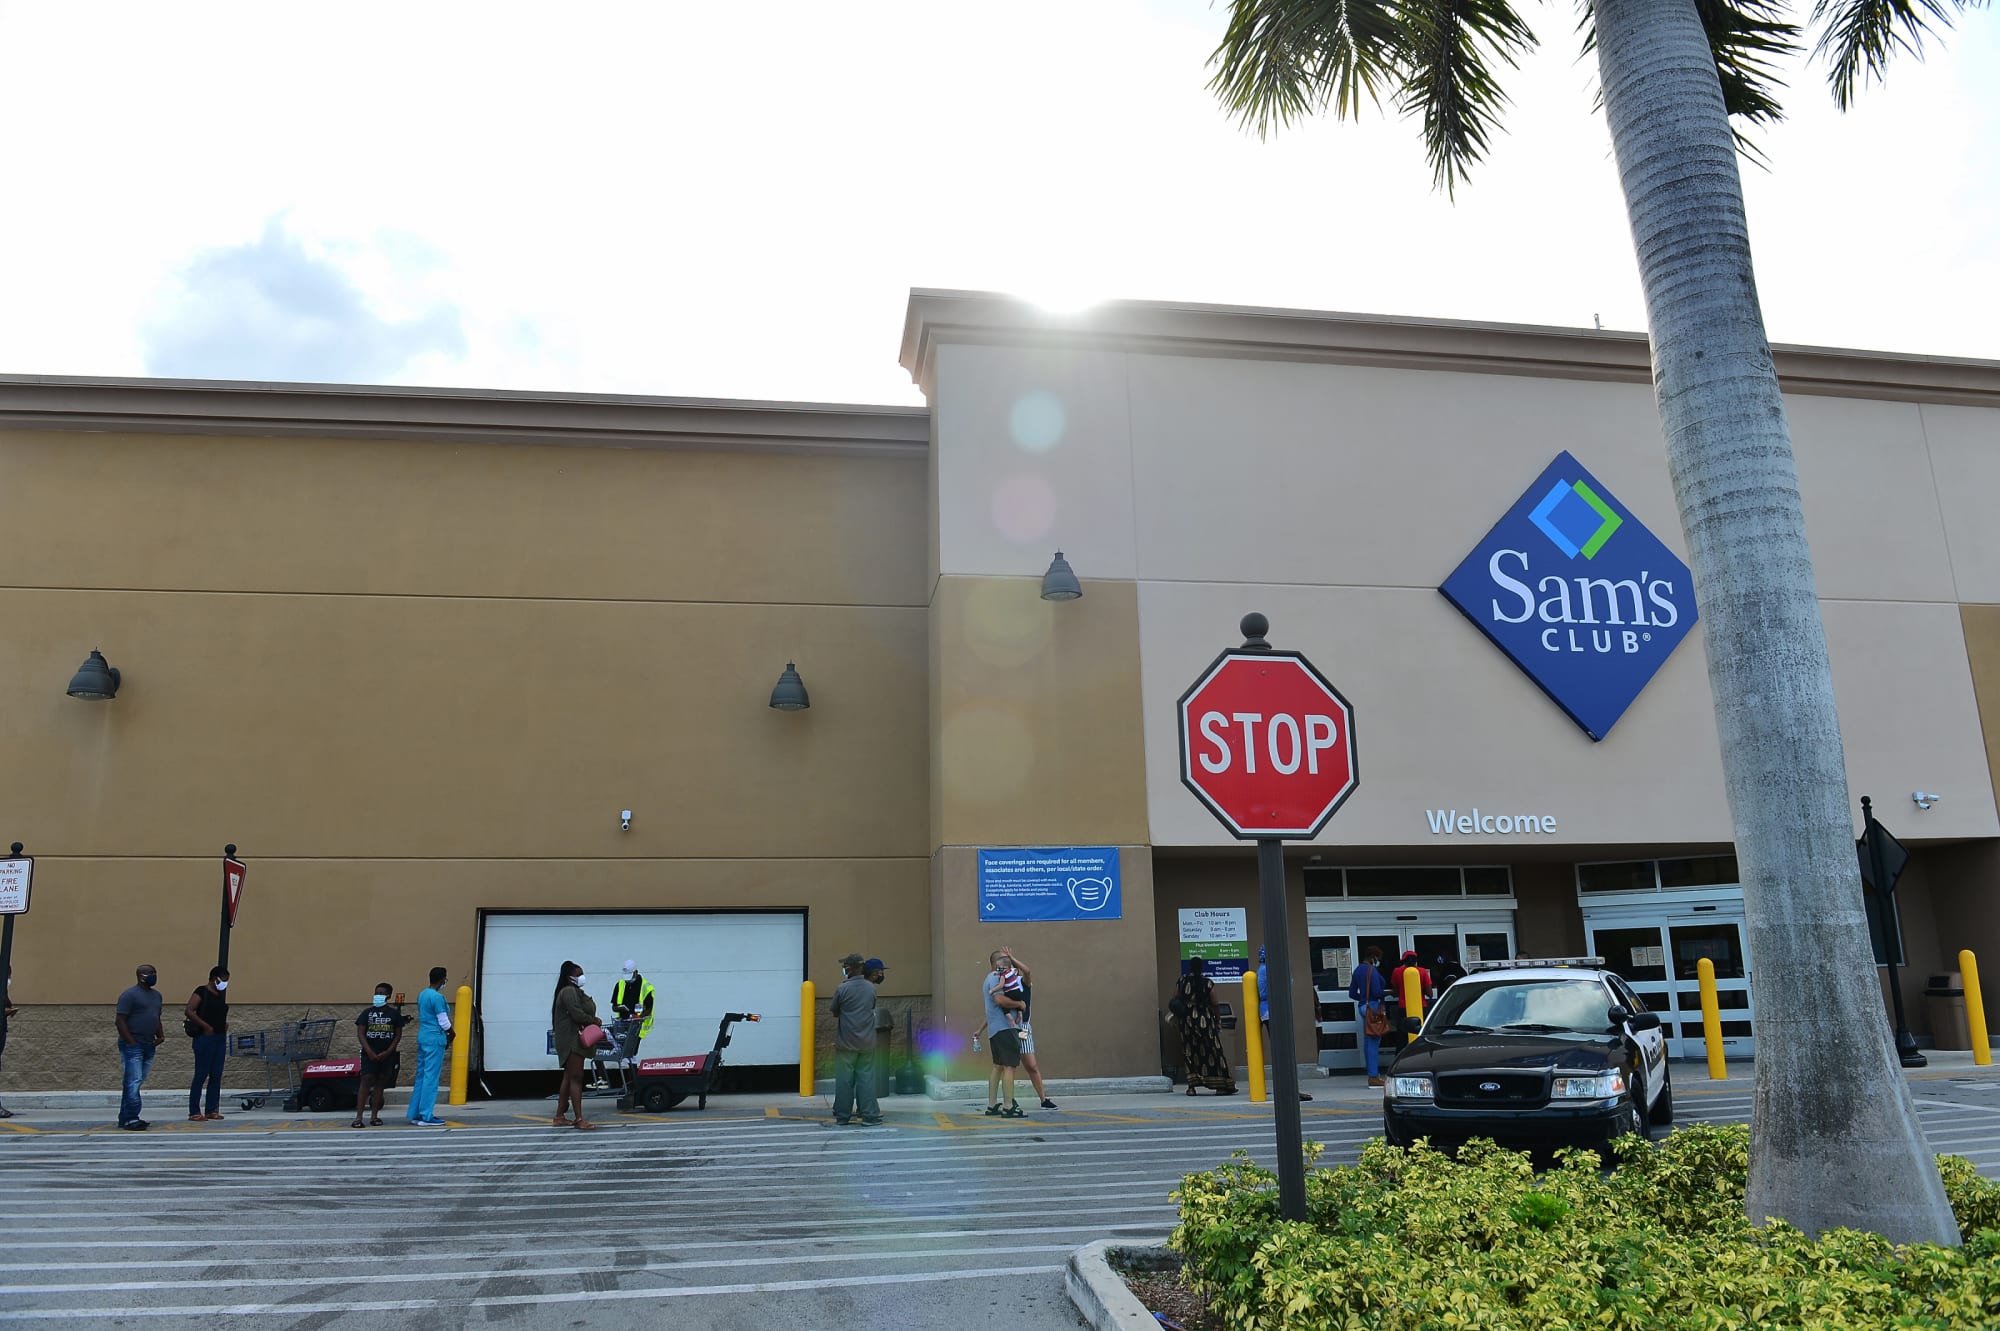 Is Sam's Club open on the Fourth of July (Independence Day)?